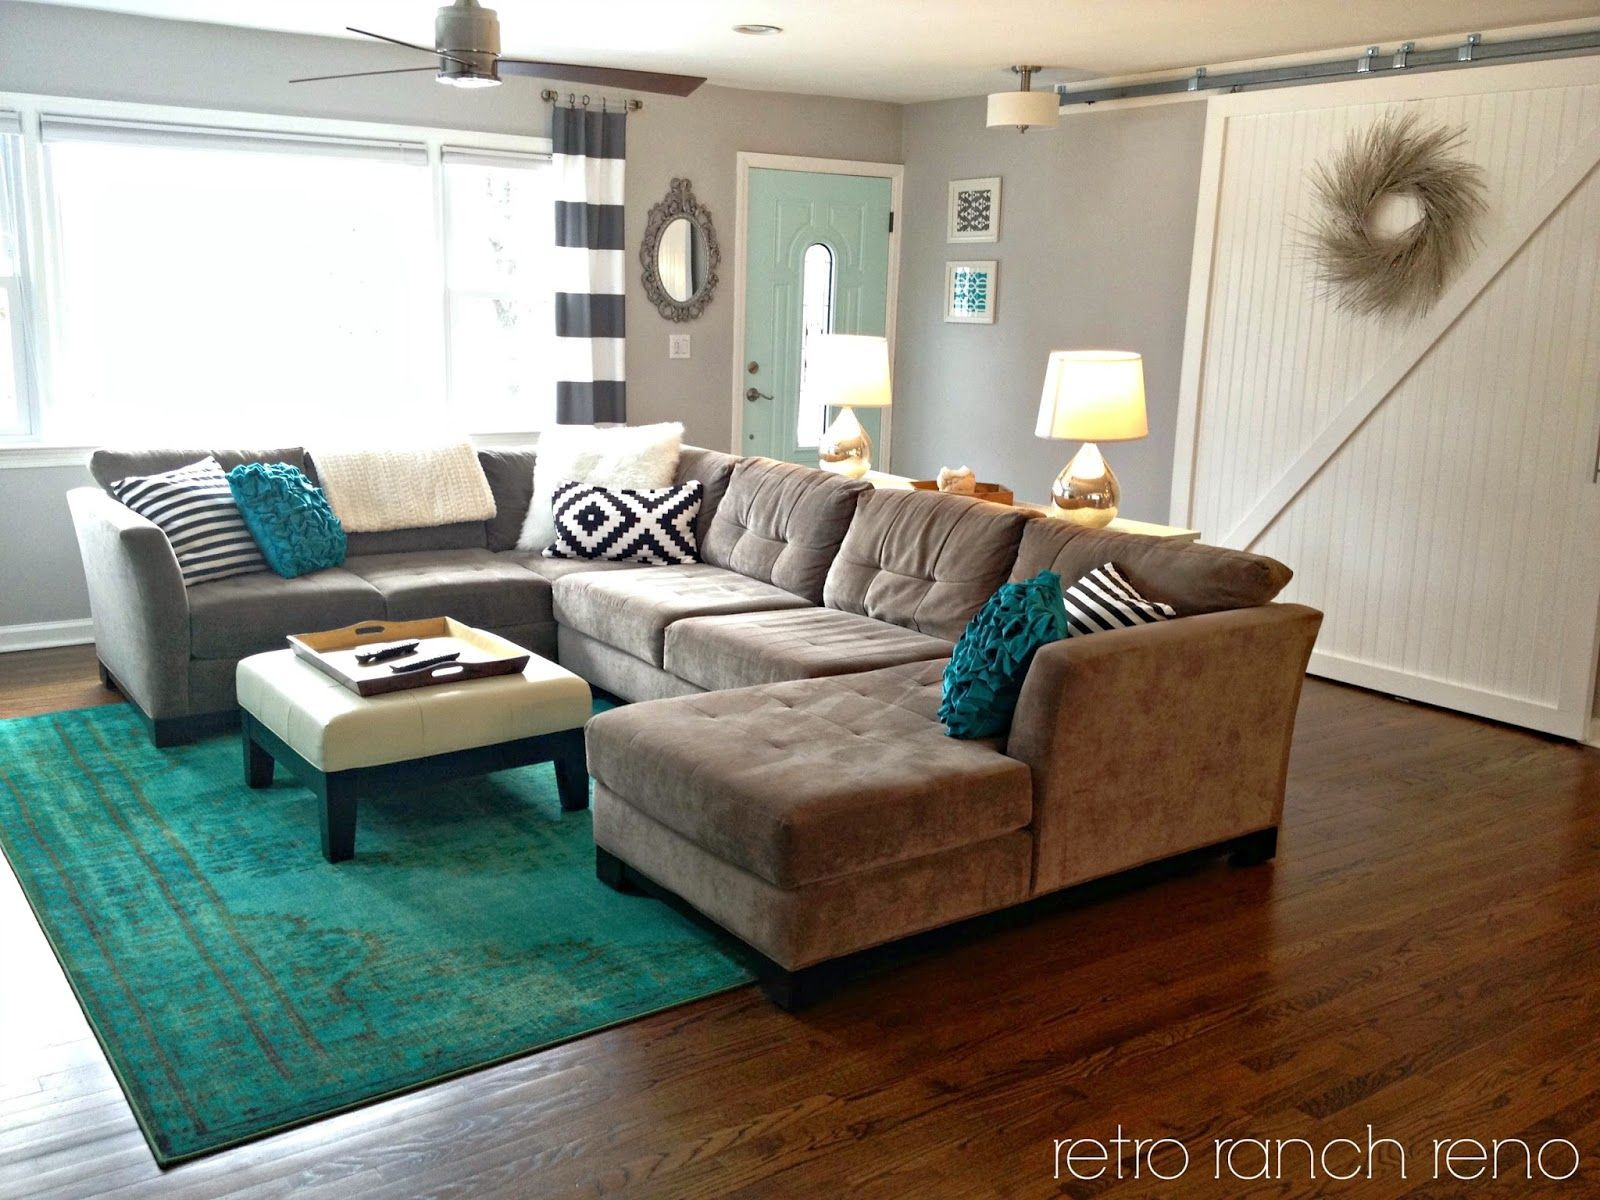 Teal Rugs For Living Room
 Teal And Brown Living Room Rugs – Modern House